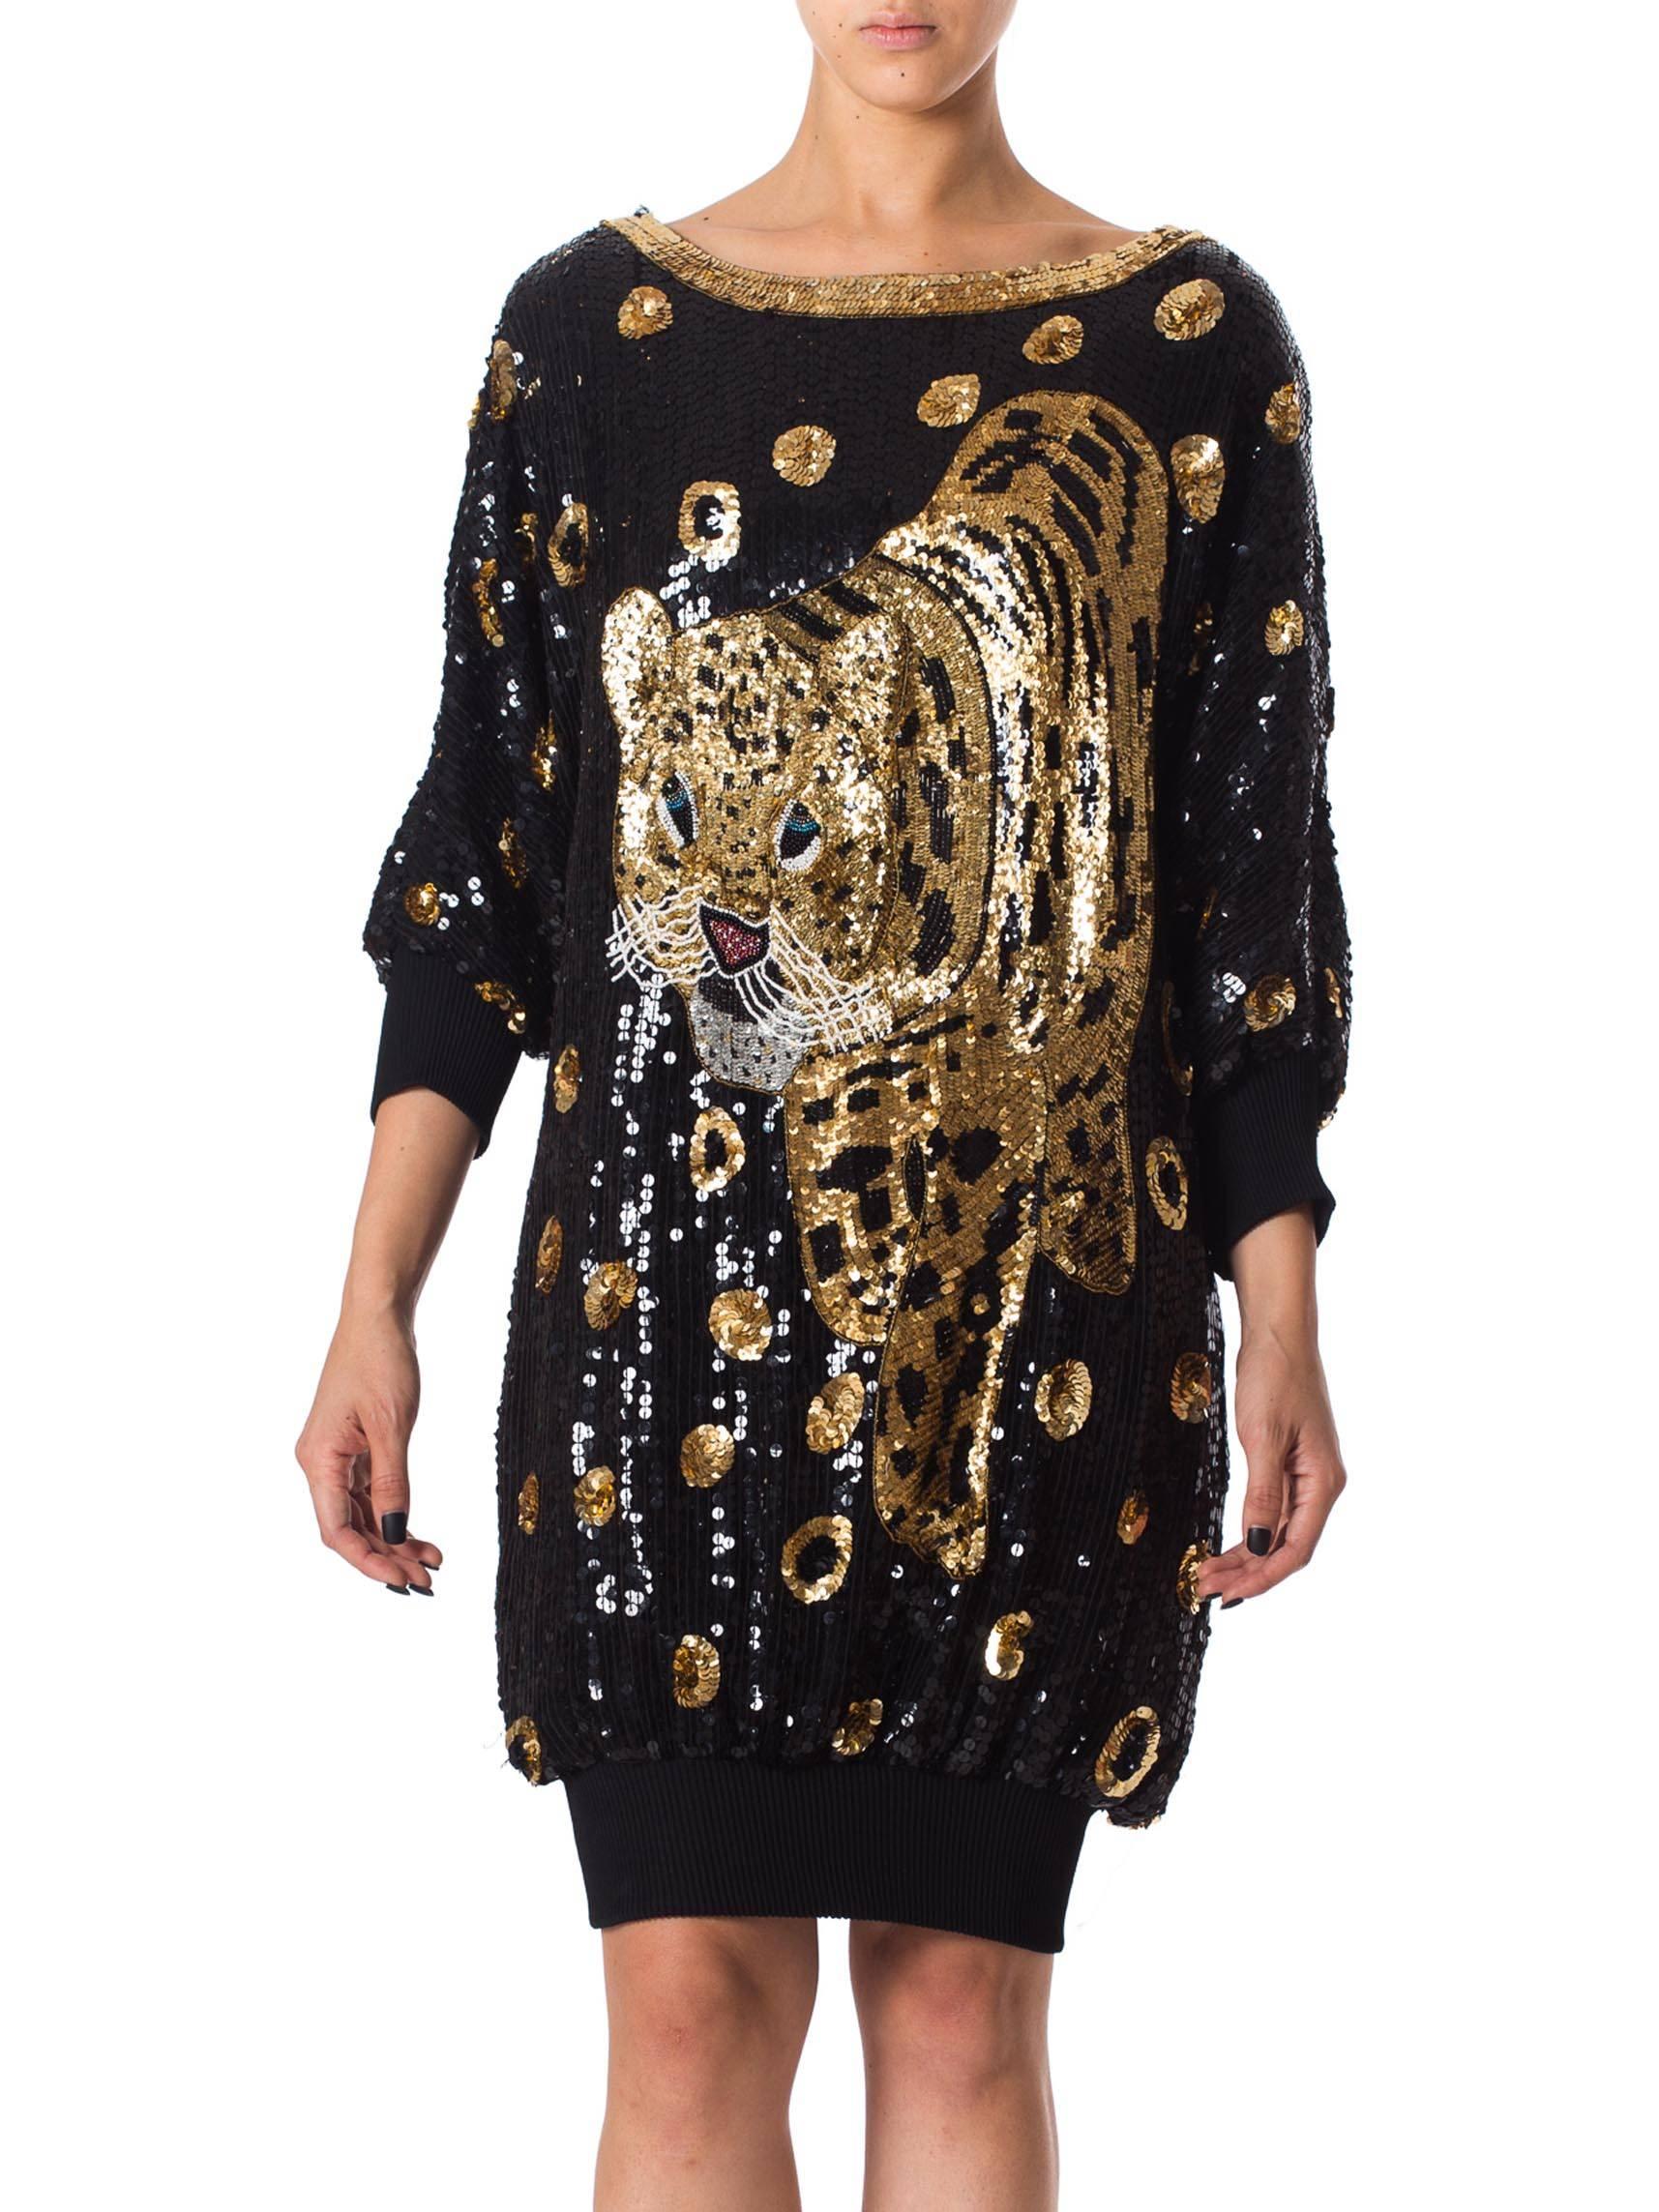 Women's 1980s Gucci Style Sequined Tiger Leopard Oversized Pullover Top Dress